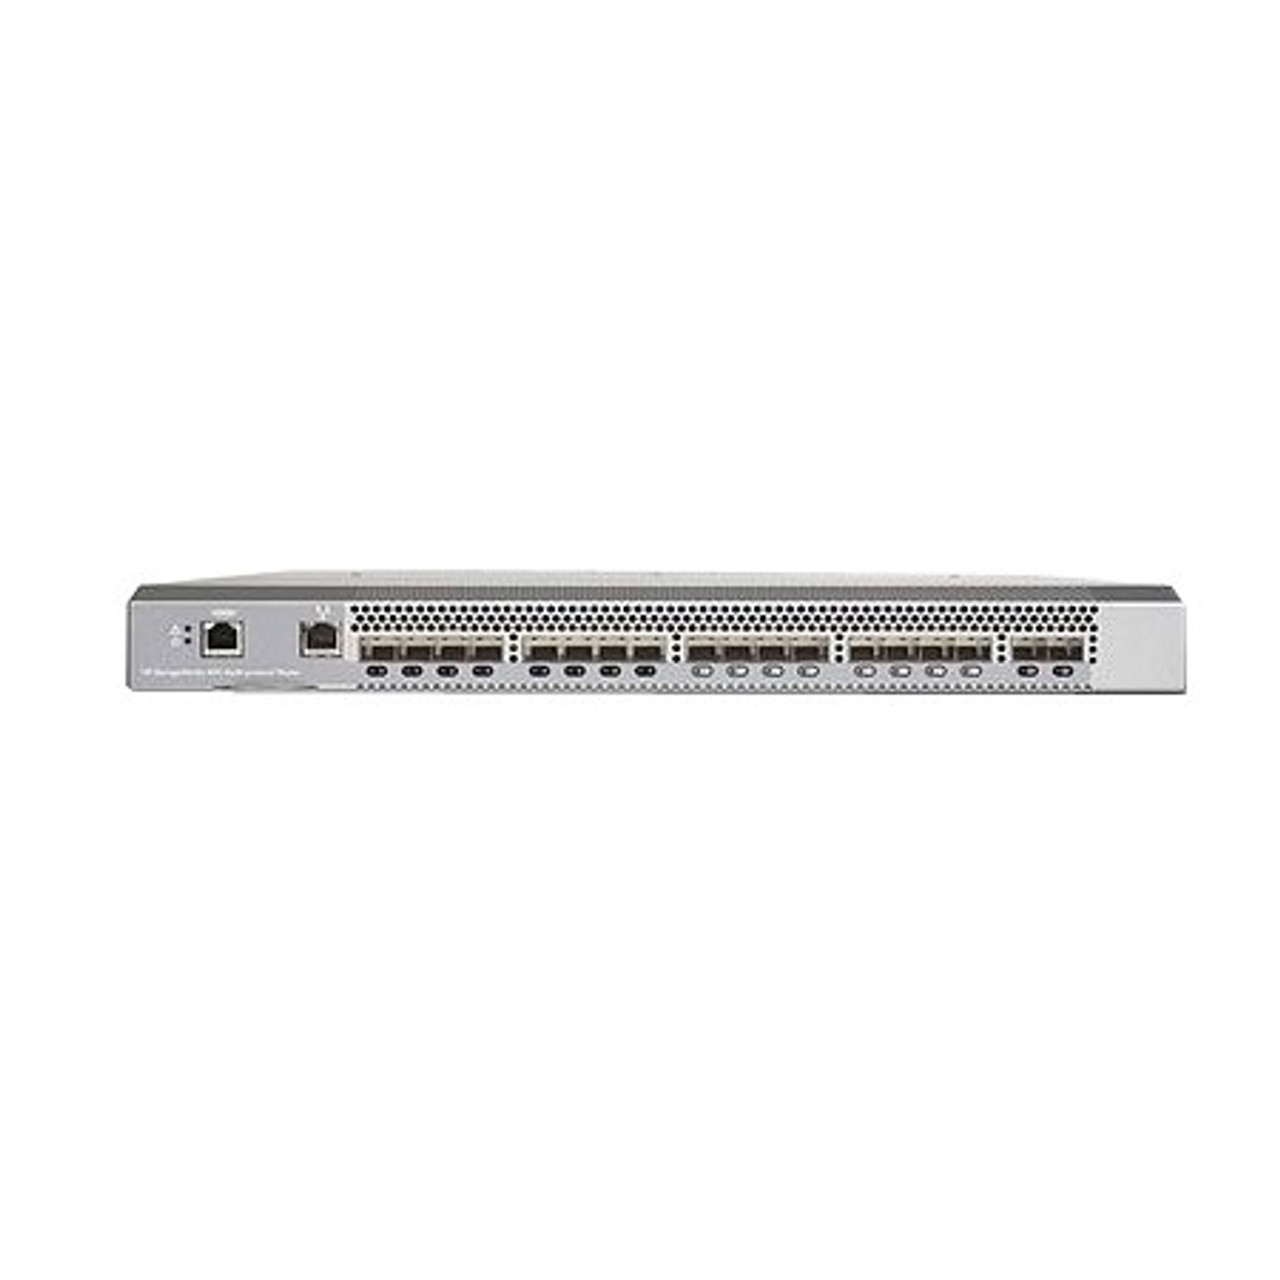 AP772A - HP StorageWorks Mpx200 Multifunction ROuter 1 Gbe Upgrade Blade Storage ROuter 8GB Fibre Channel iSCSI